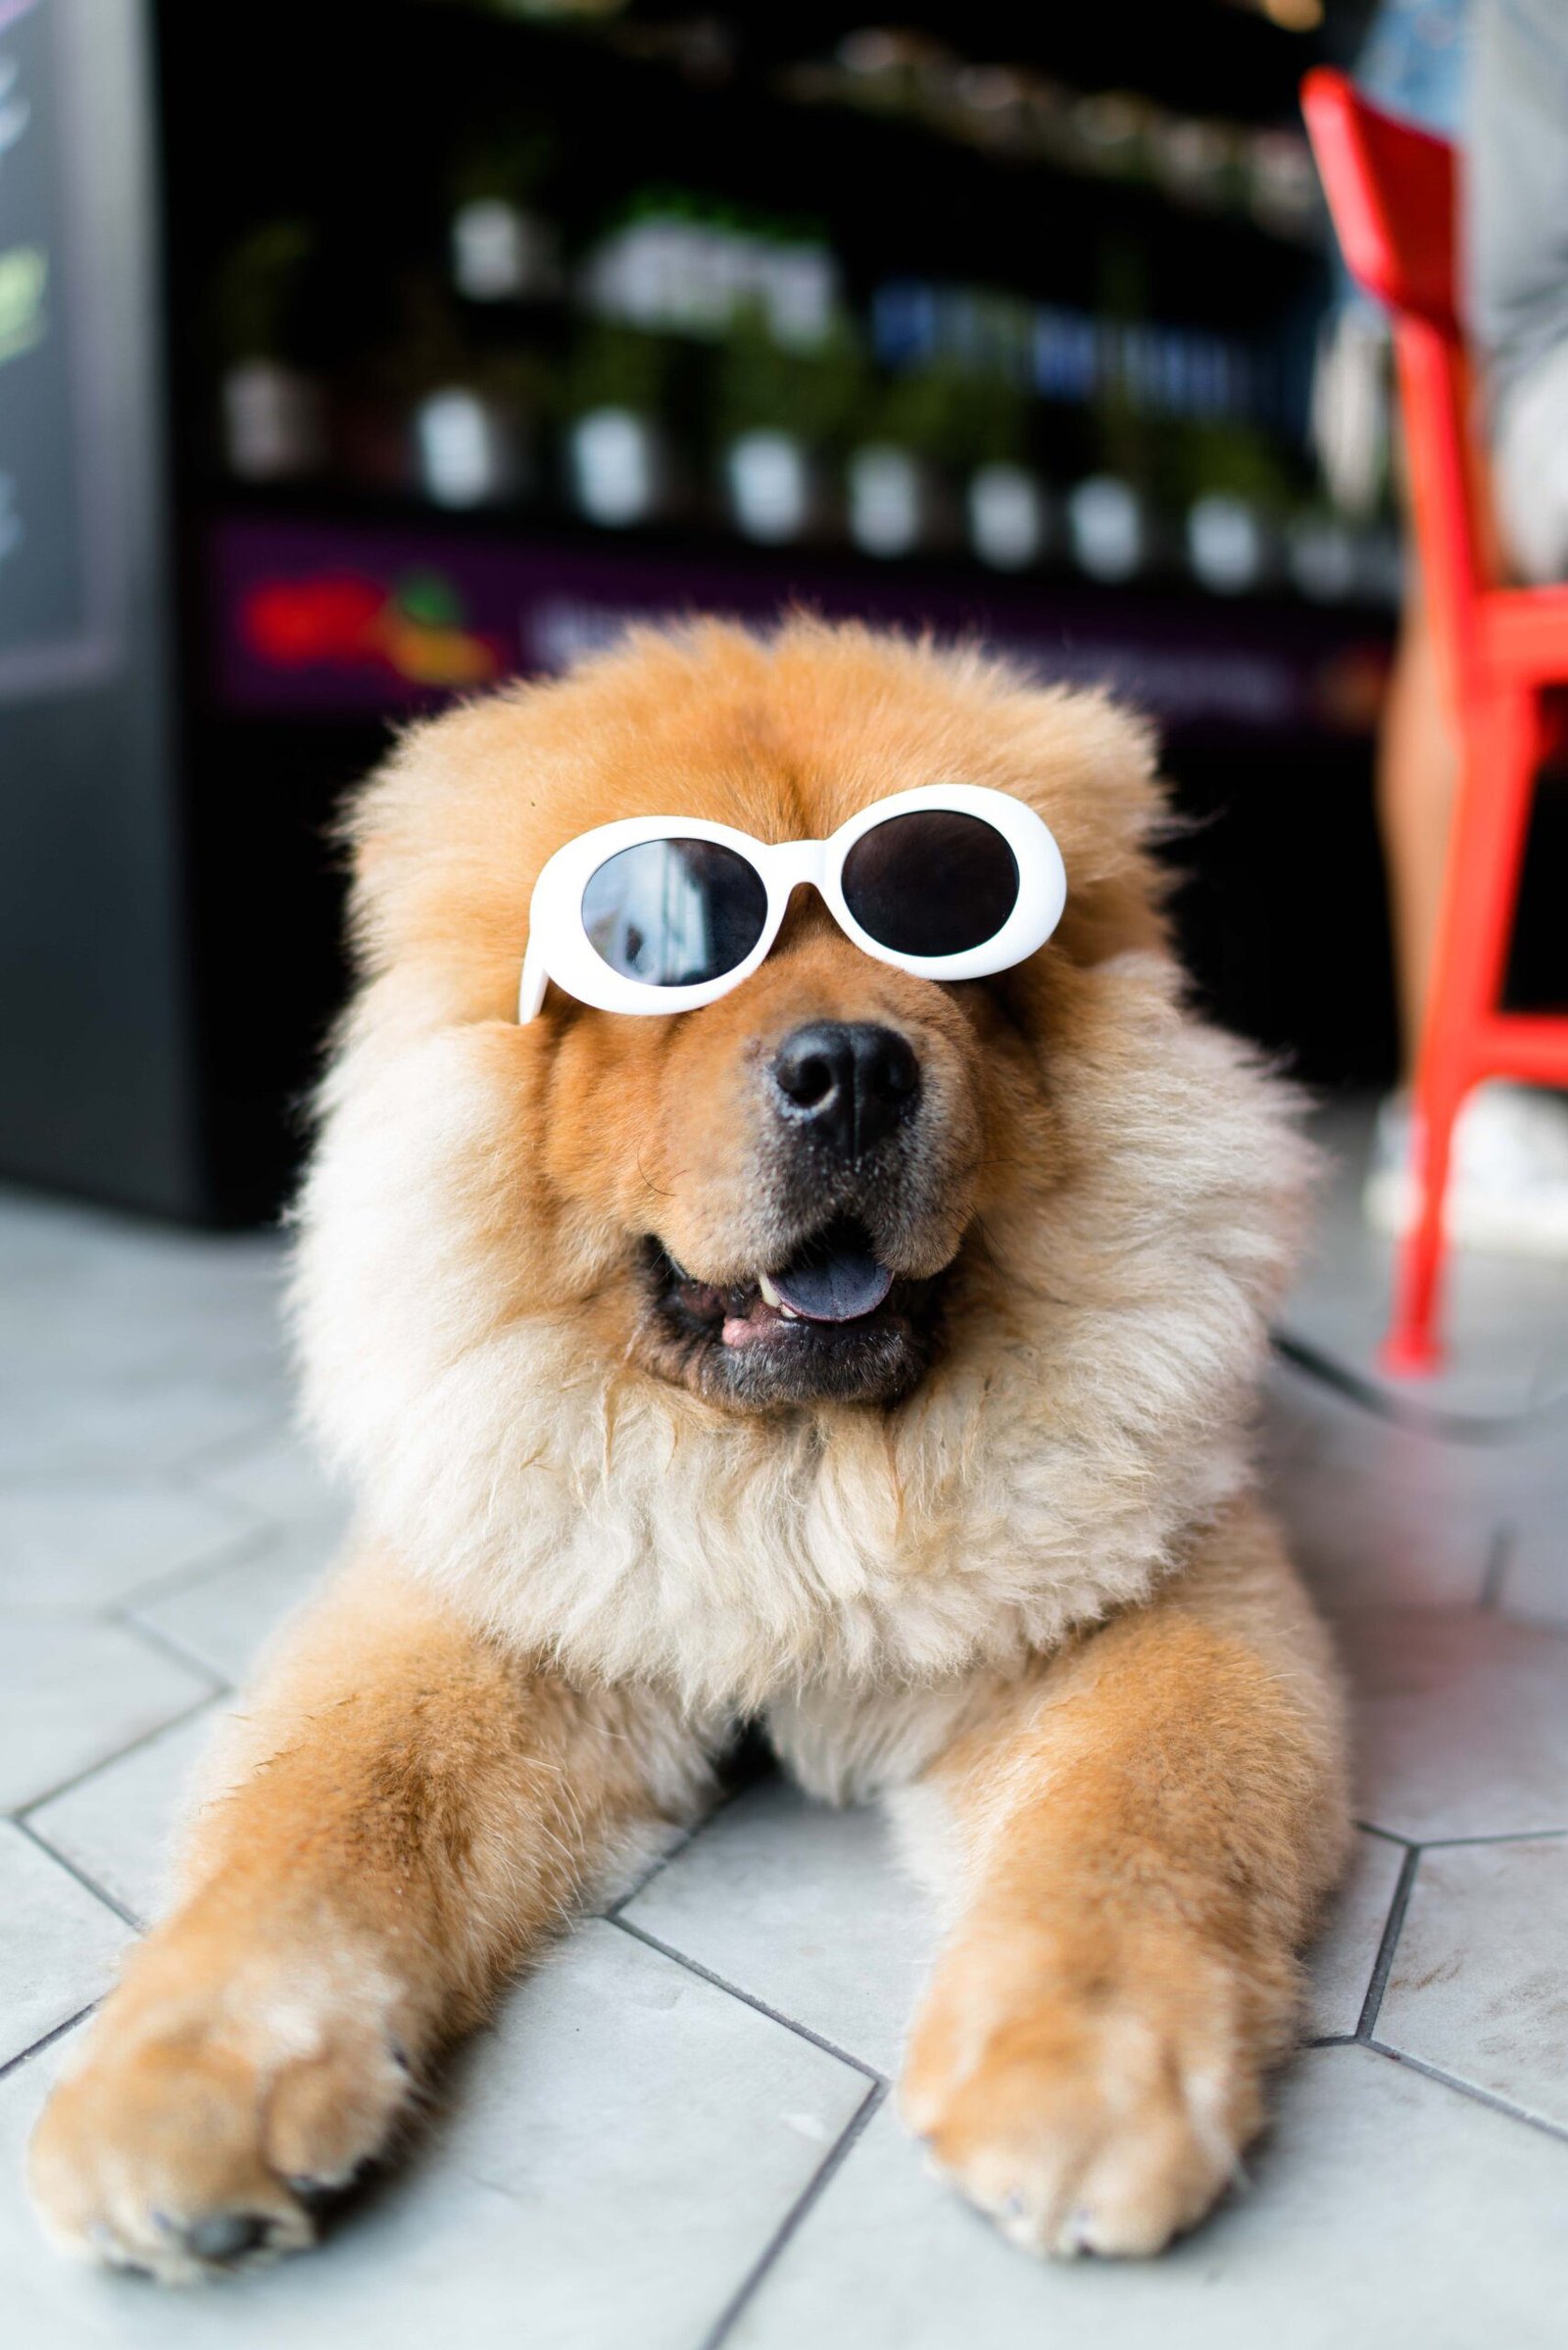 Top Dog Grooming Services in Singapore